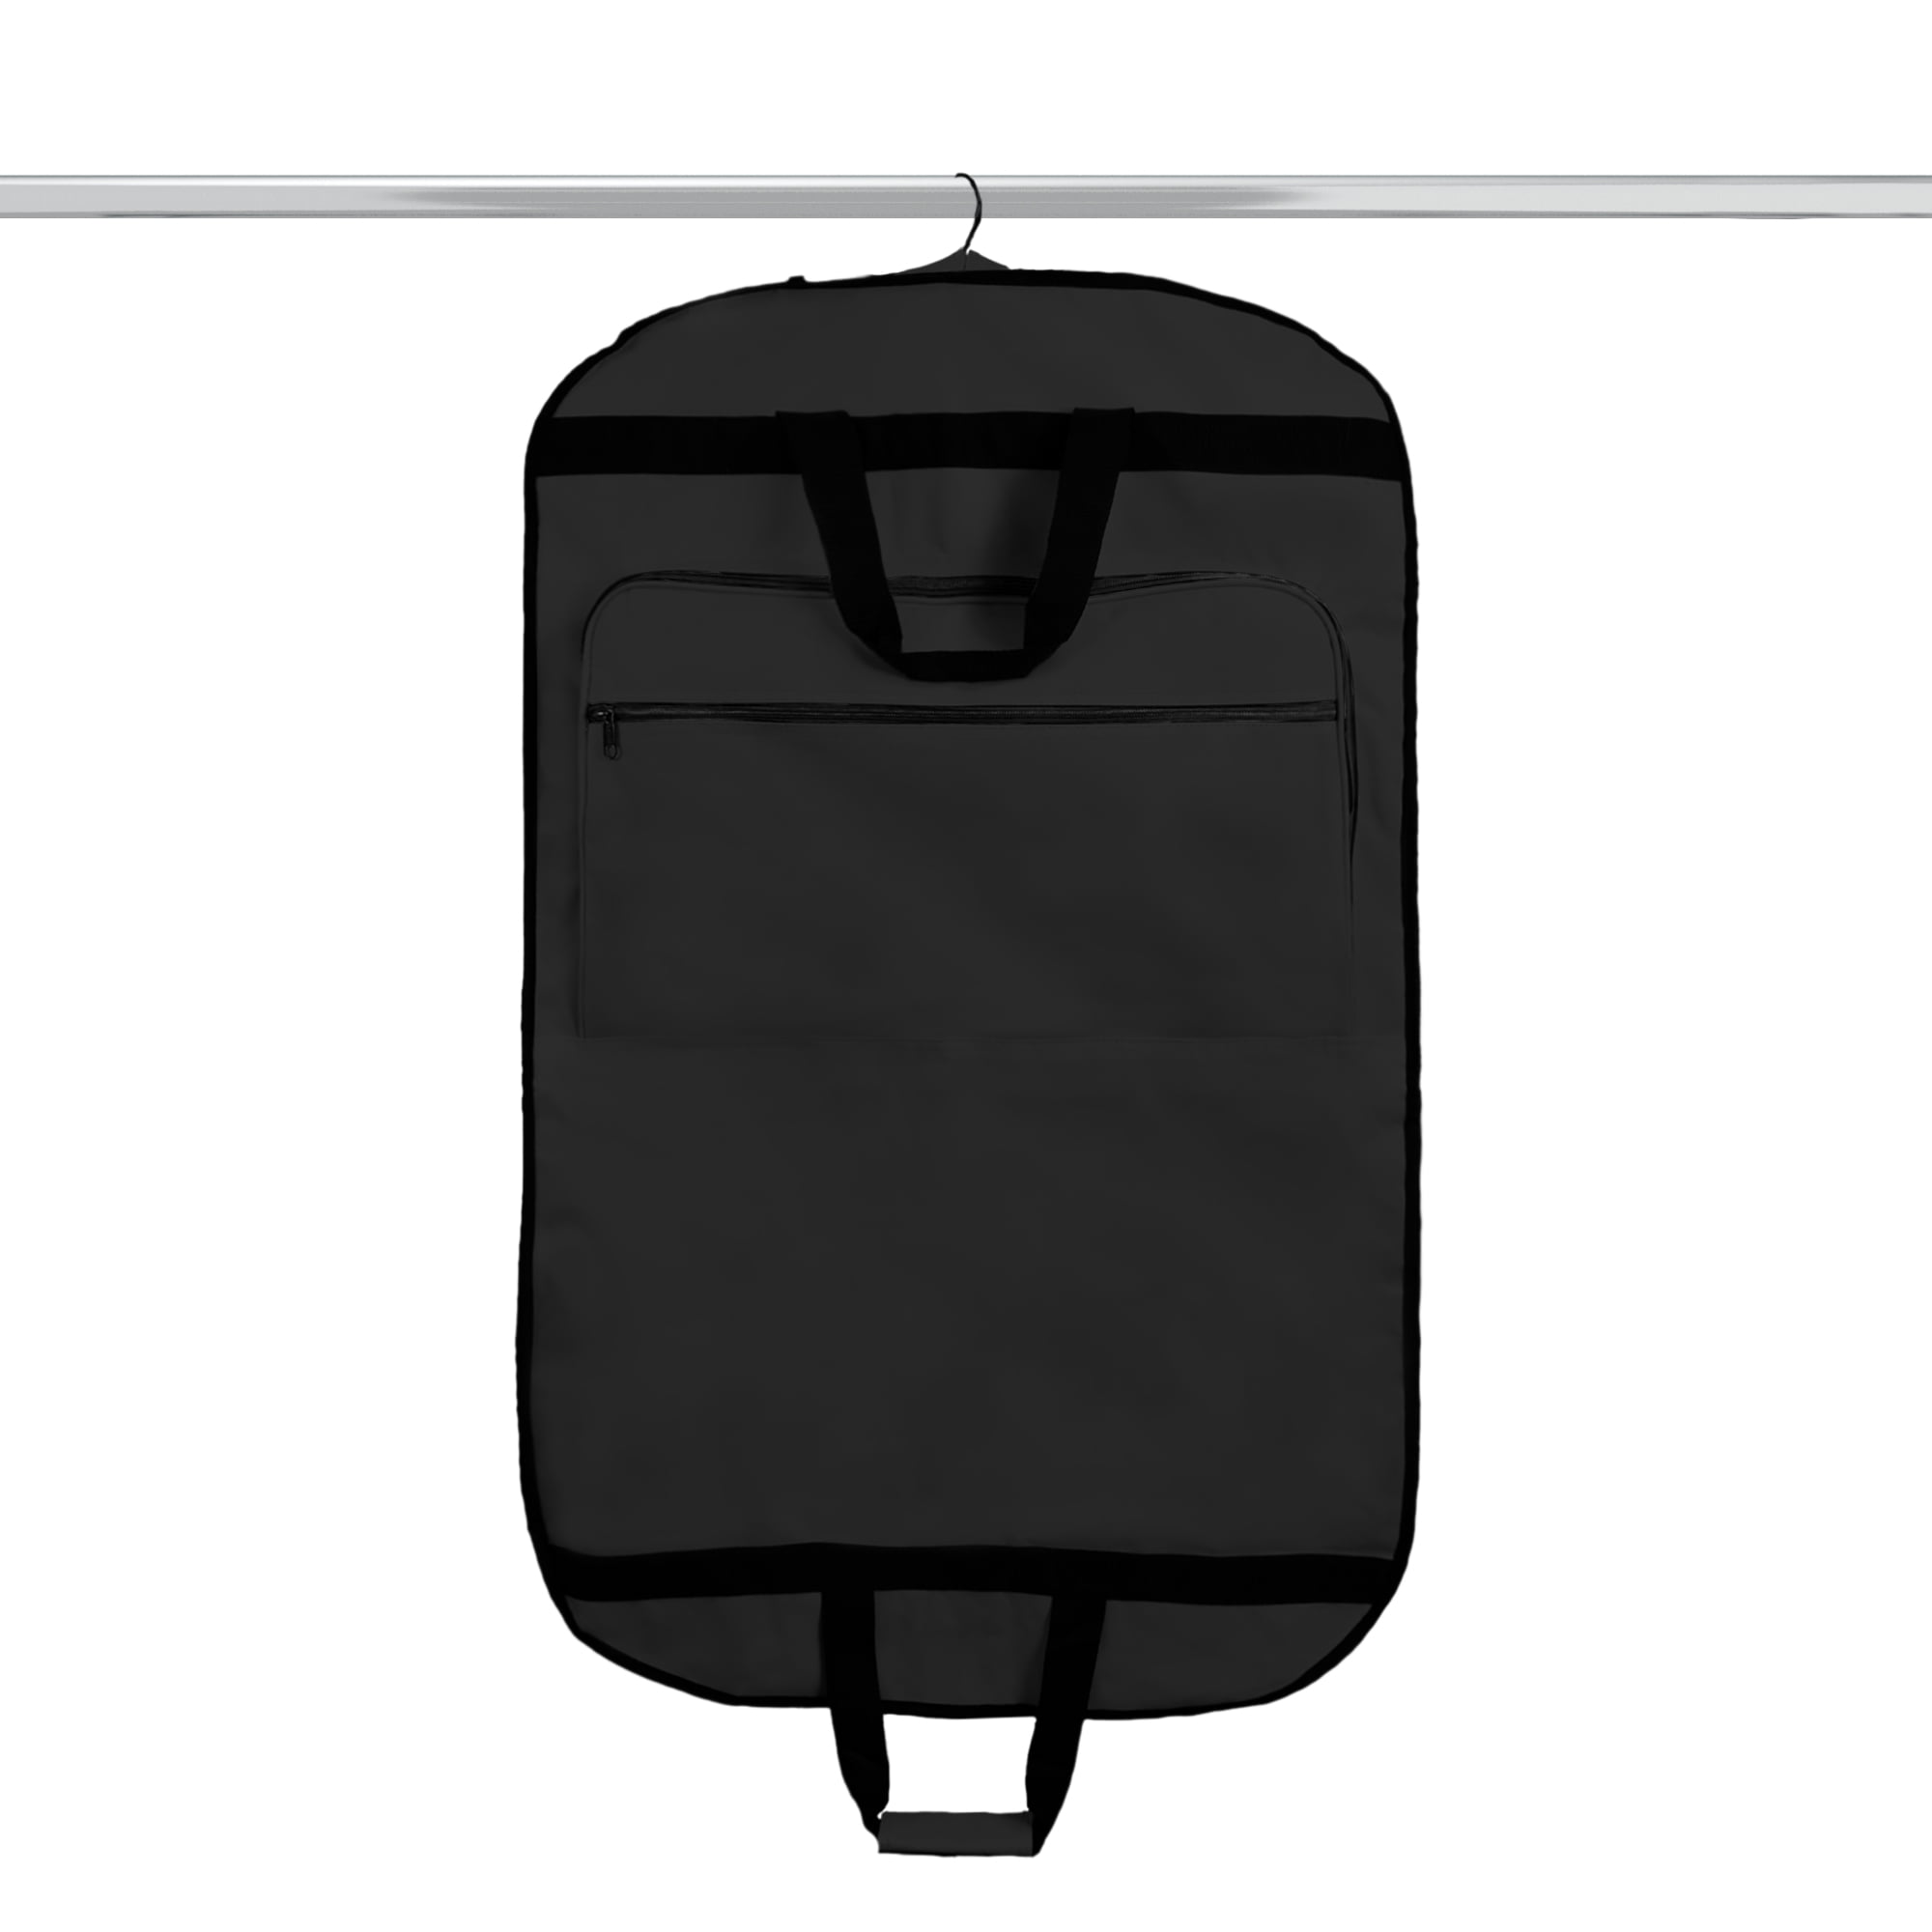 Foldable Garment Bag with Pockets for Business